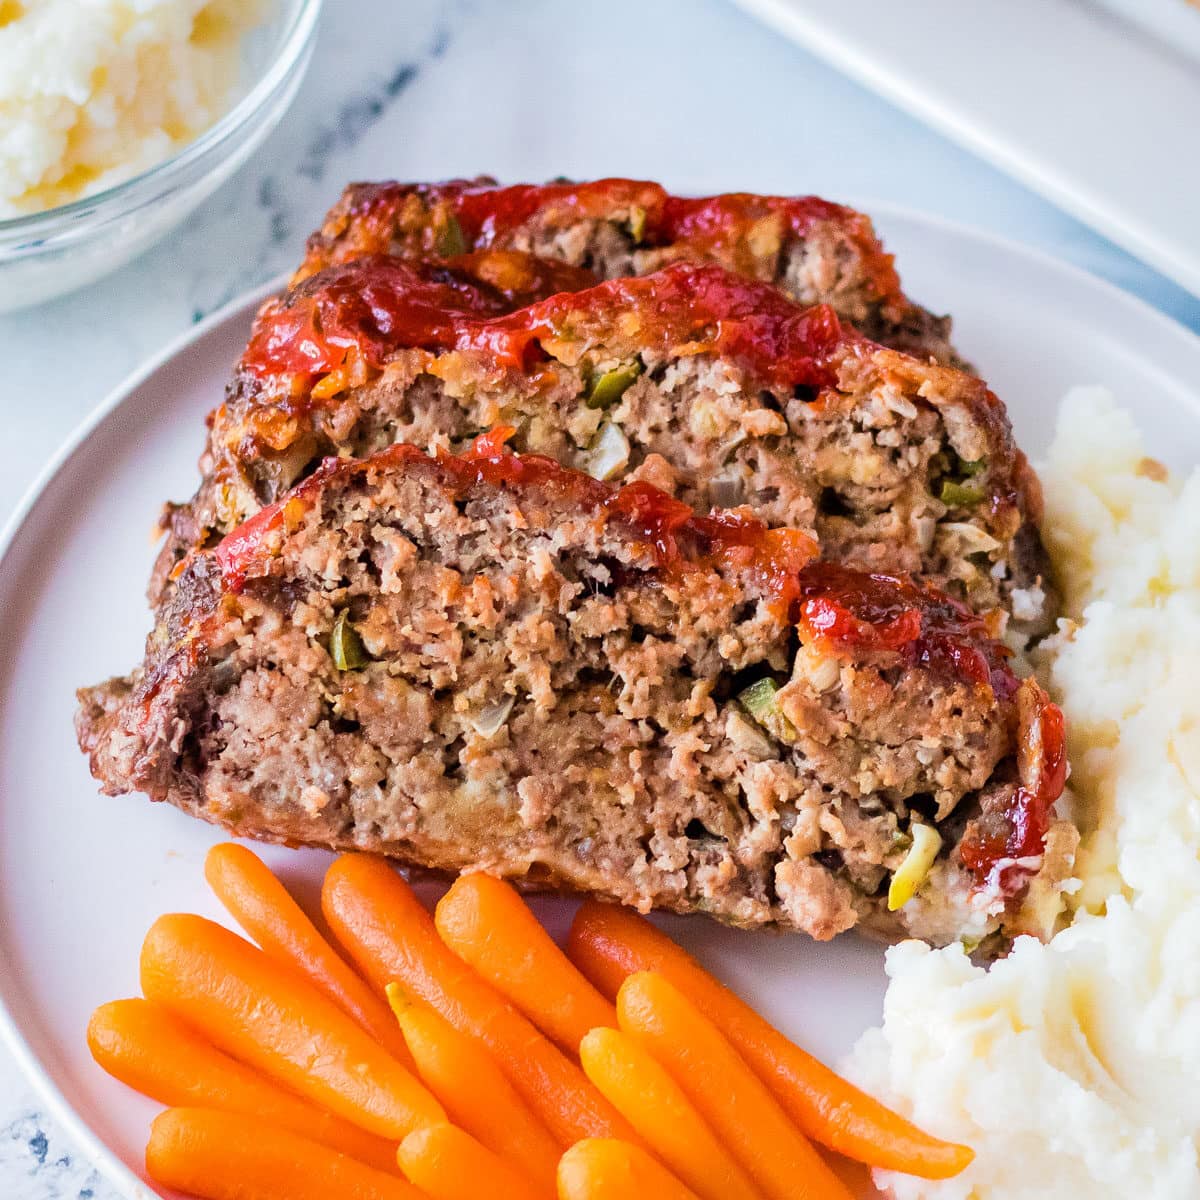 top view of cracker barrel meatloaf on a plate with carrots.